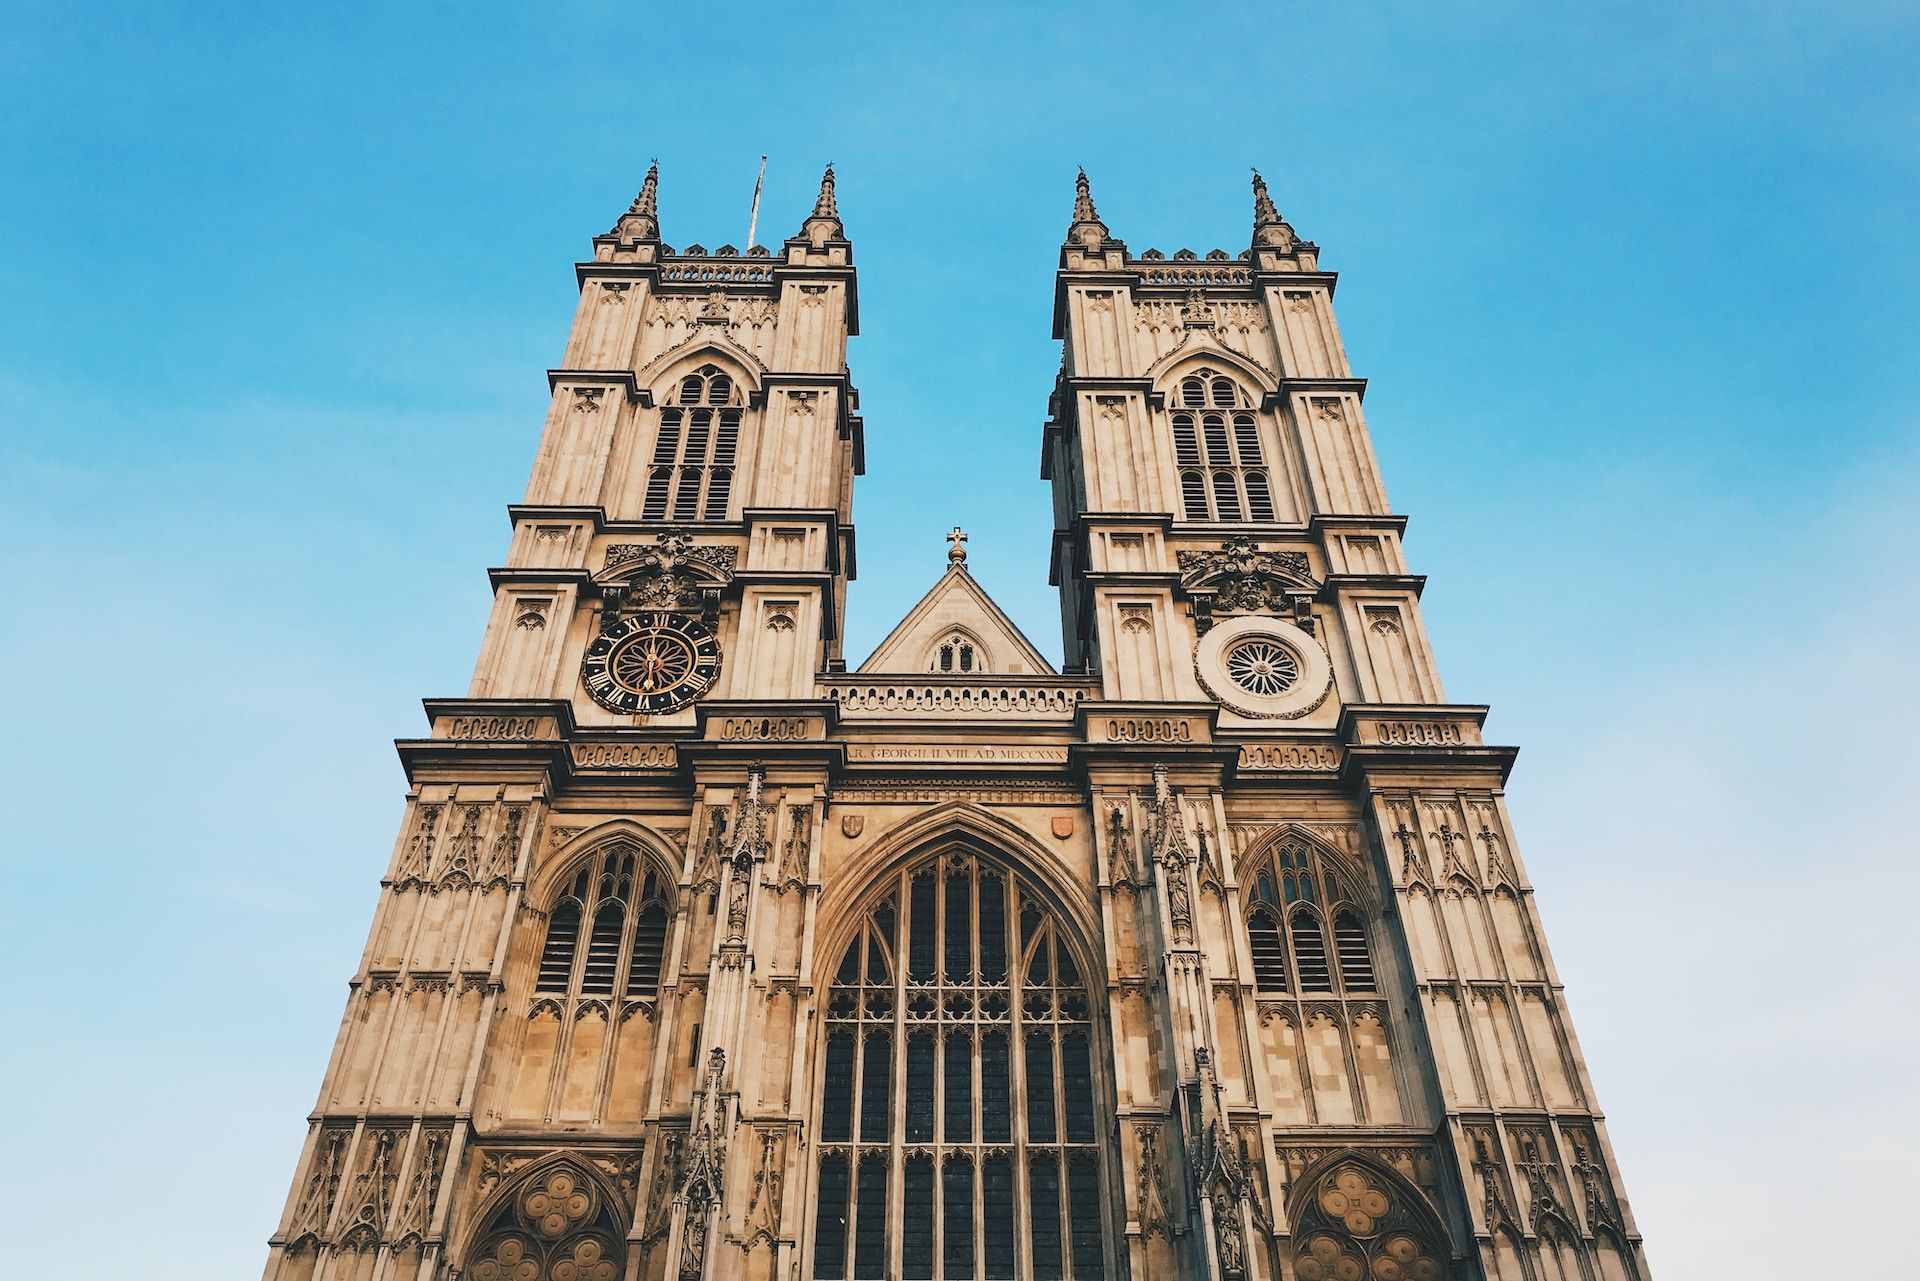 The royal church, Westminster Abbey